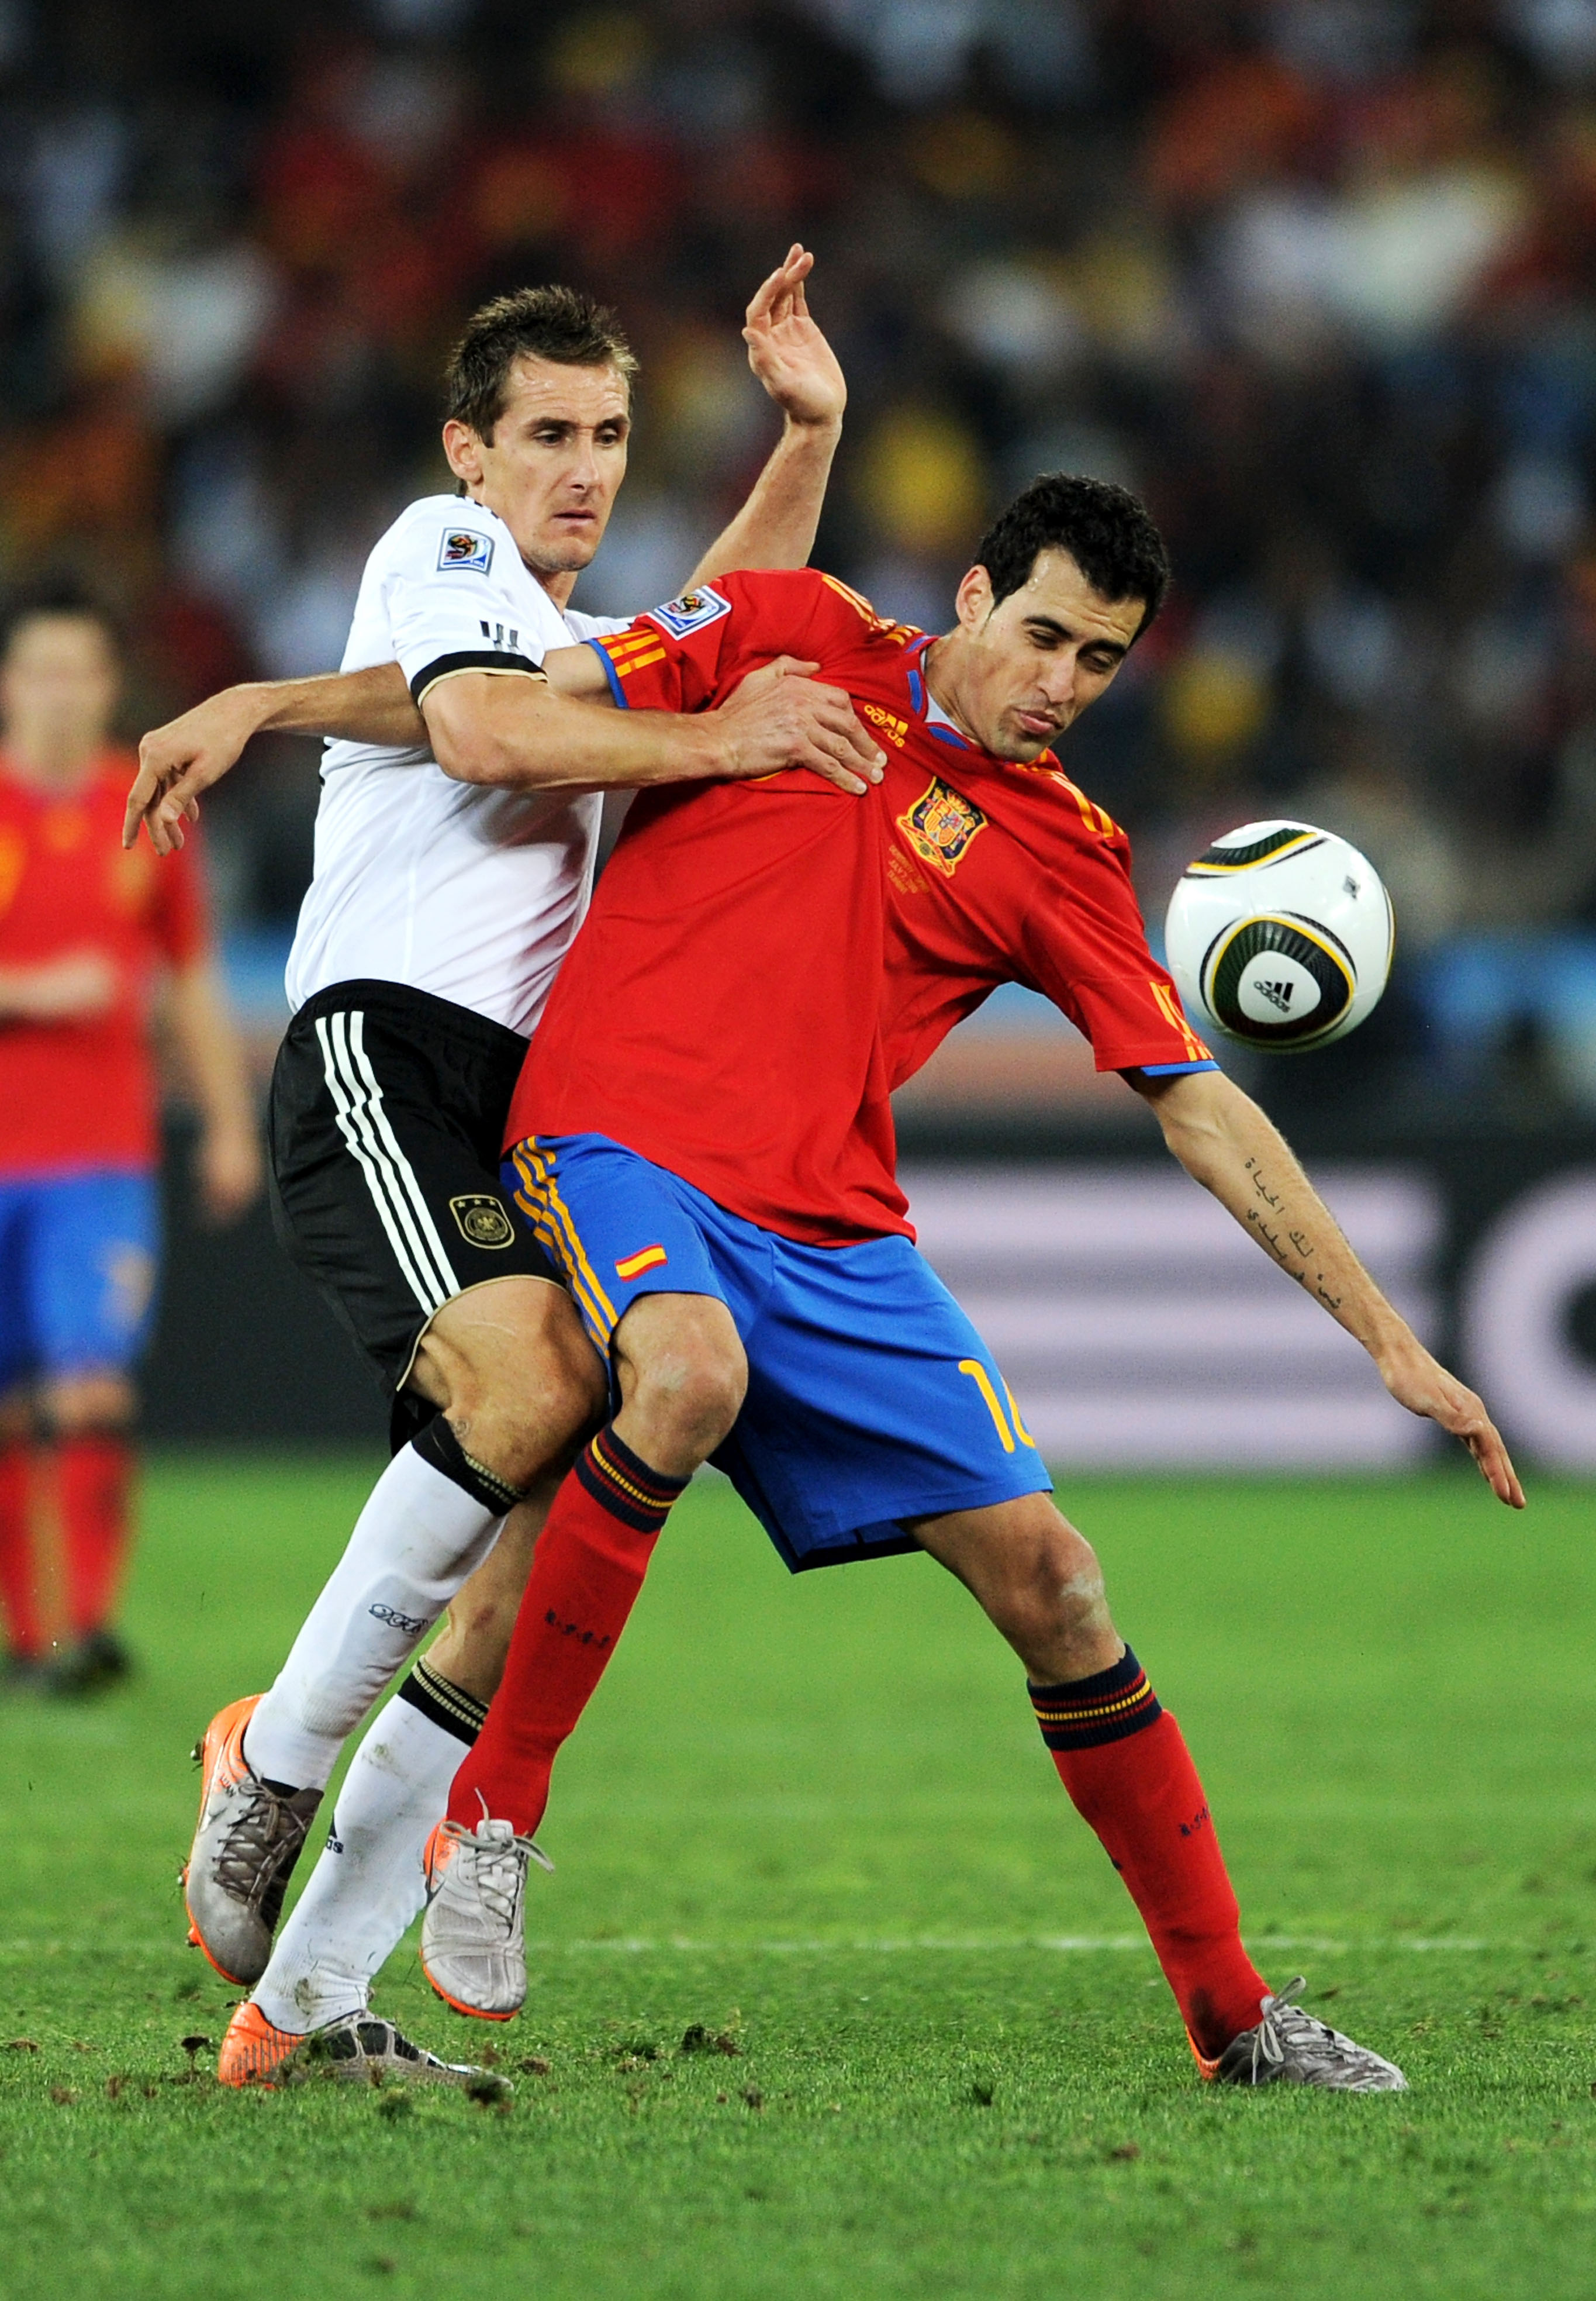 DURBAN, SOUTH AFRICA - JULY 07:  Miroslav Klose of Germany challenges Sergio Busquets of Spain during the 2010 FIFA World Cup South Africa Semi Final match between Germany and Spain at Durban Stadium on July 7, 2010 in Durban, South Africa.  (Photo by Jas